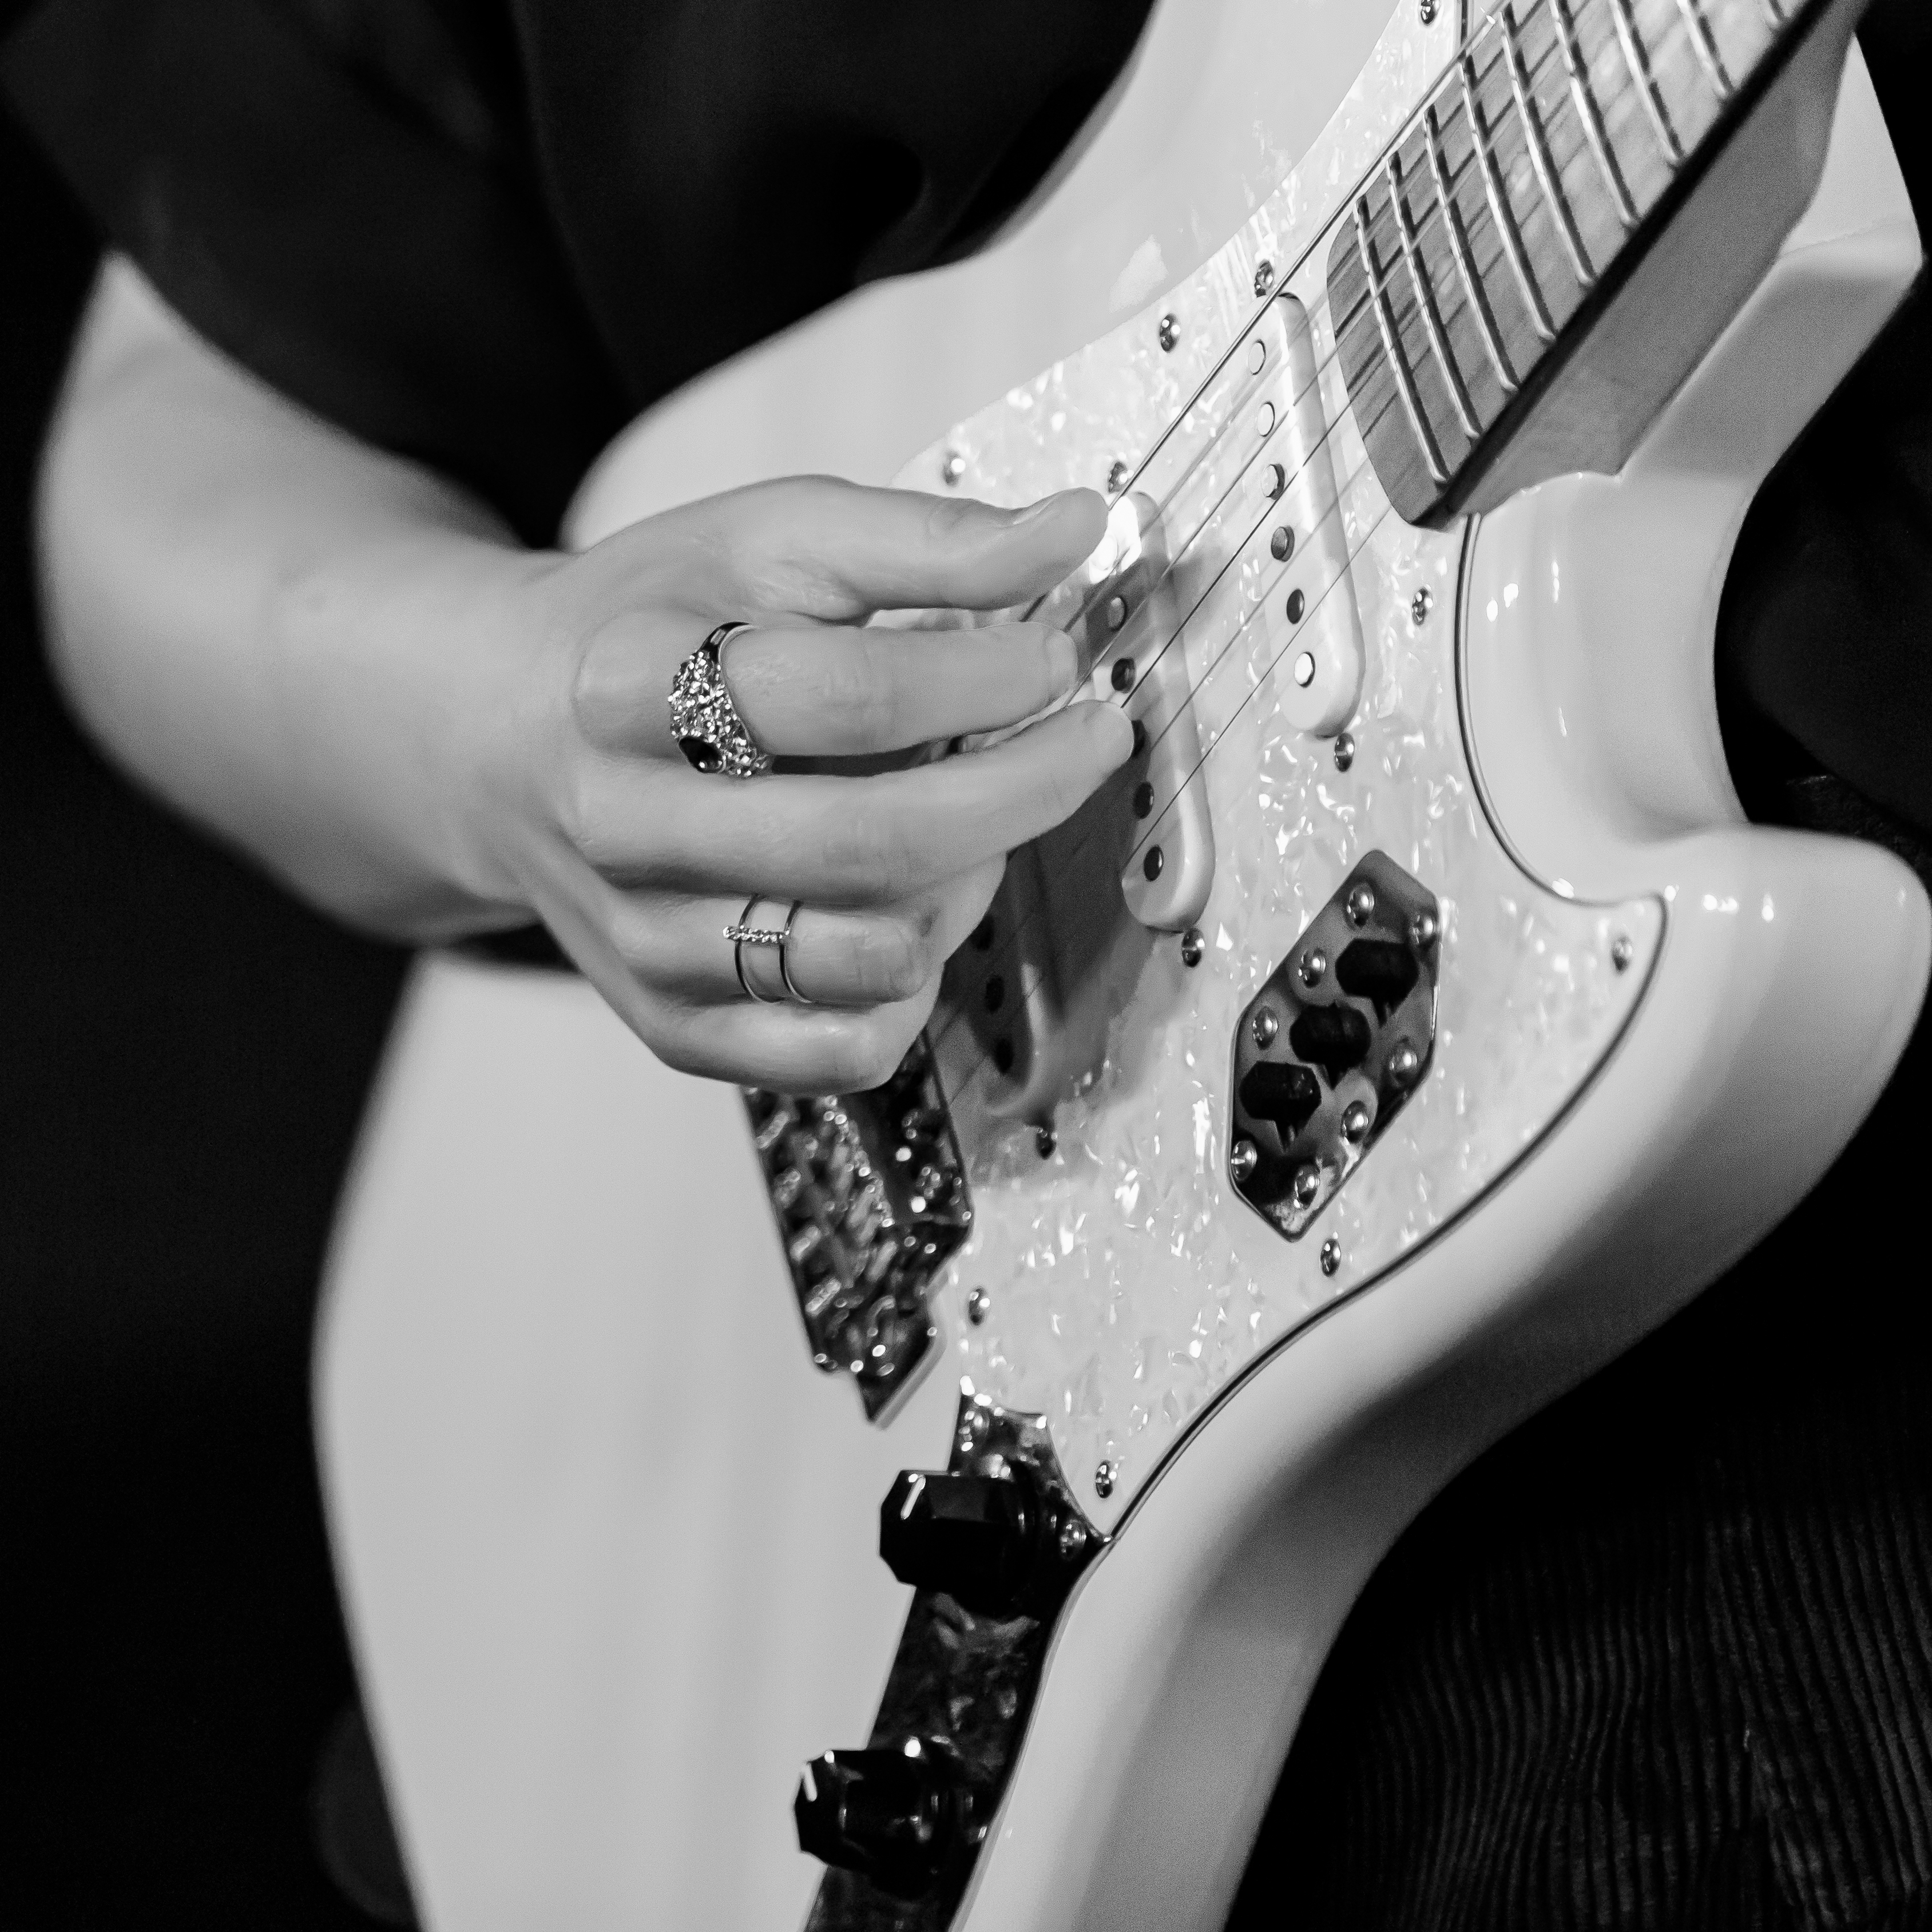 A hand playing a guitar.